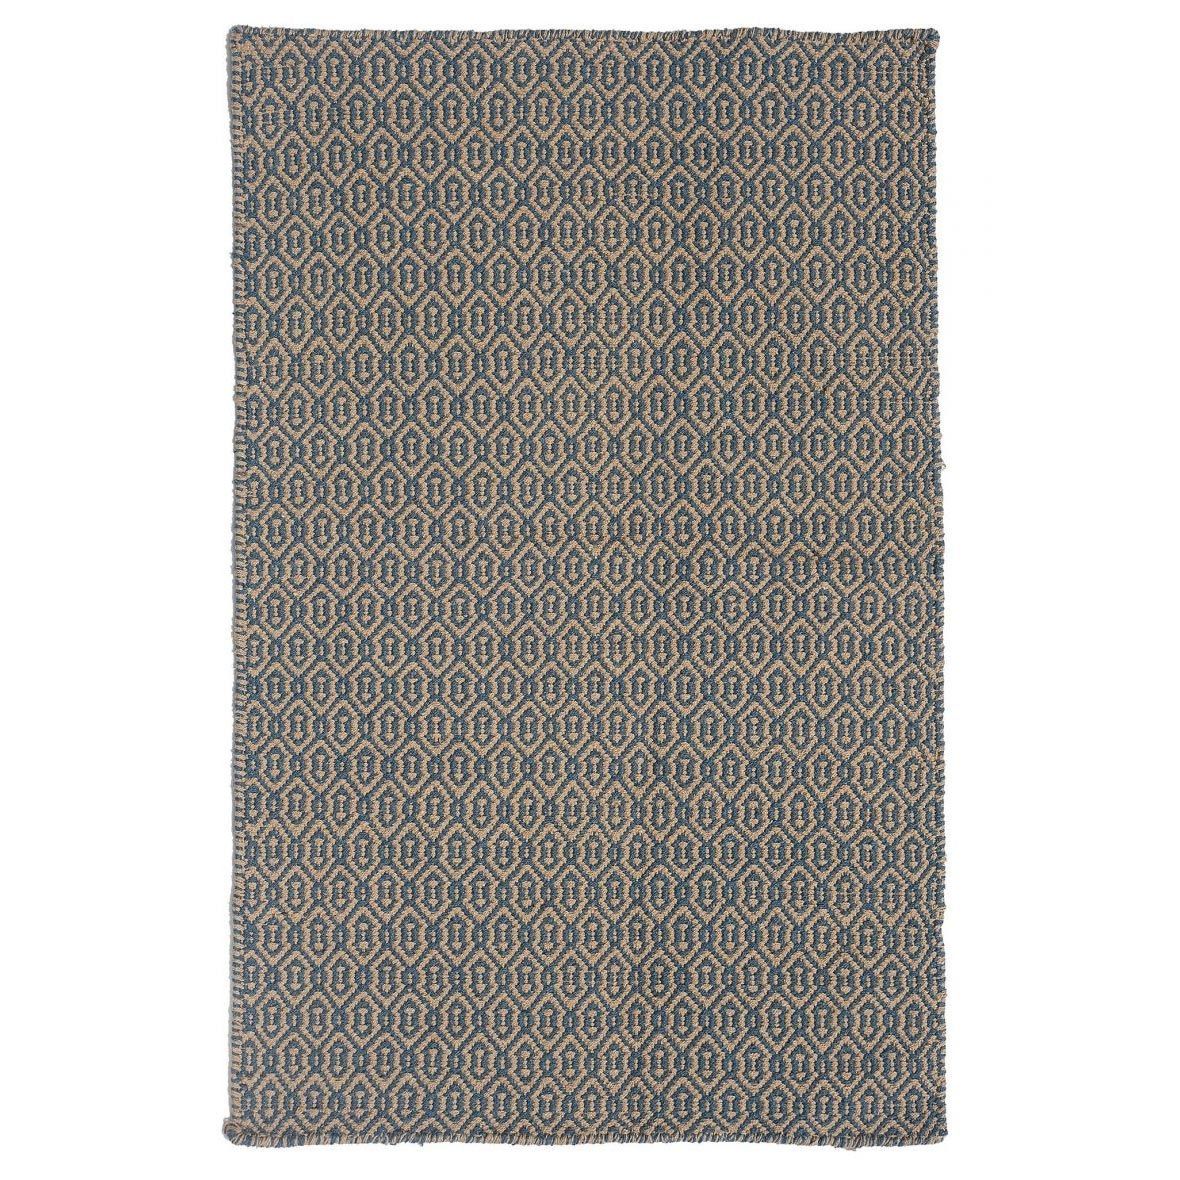 18 Best Washable Rugs To In 2021, Best Washable Rugs For Entryway